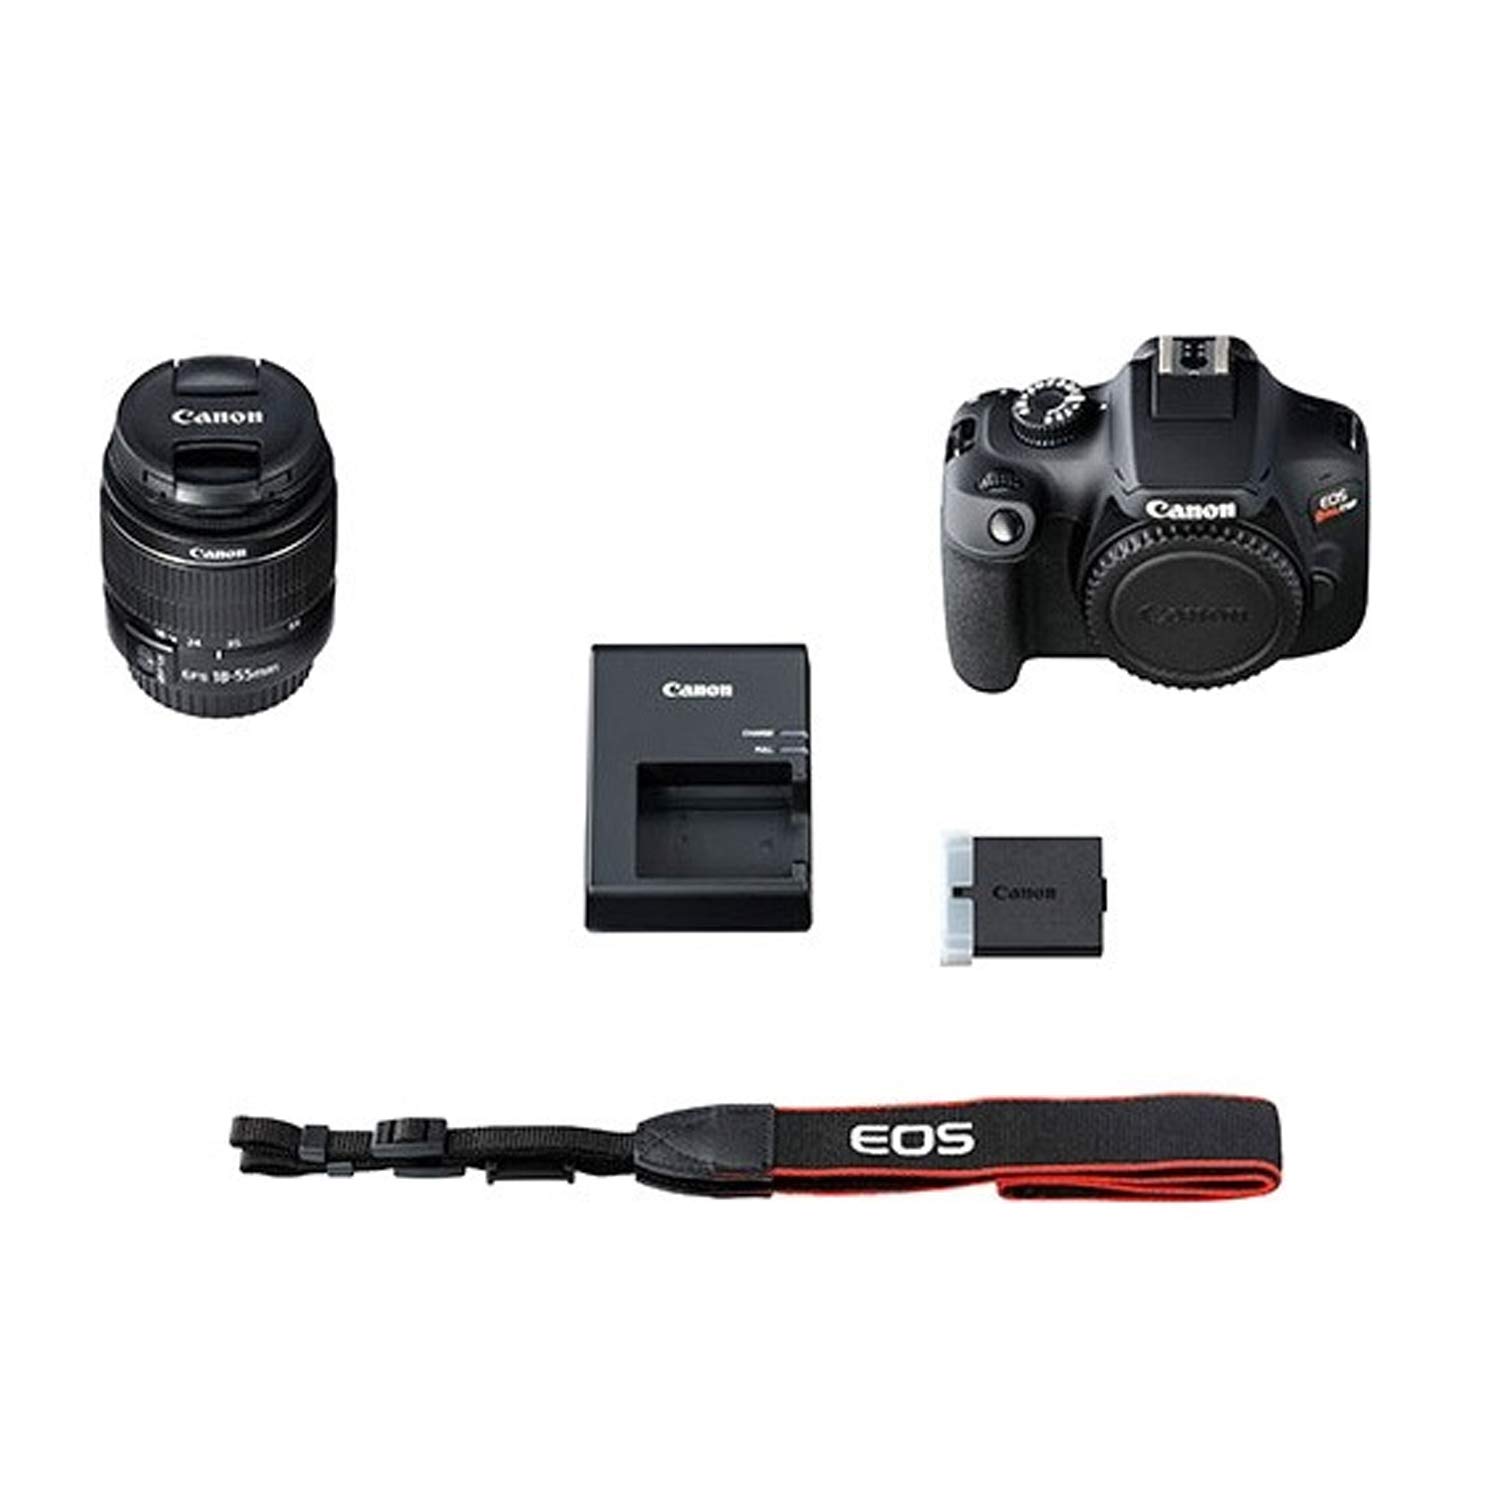 Canon Rebel T100 / EOS 4000D DSLR Camera w/EF-S 18-55mm F/3.5-5.6 Zoom Lens + 64GB Memory, Filters,Case, Tripod, Flash, and More (34pc Bundle) (Renewed)